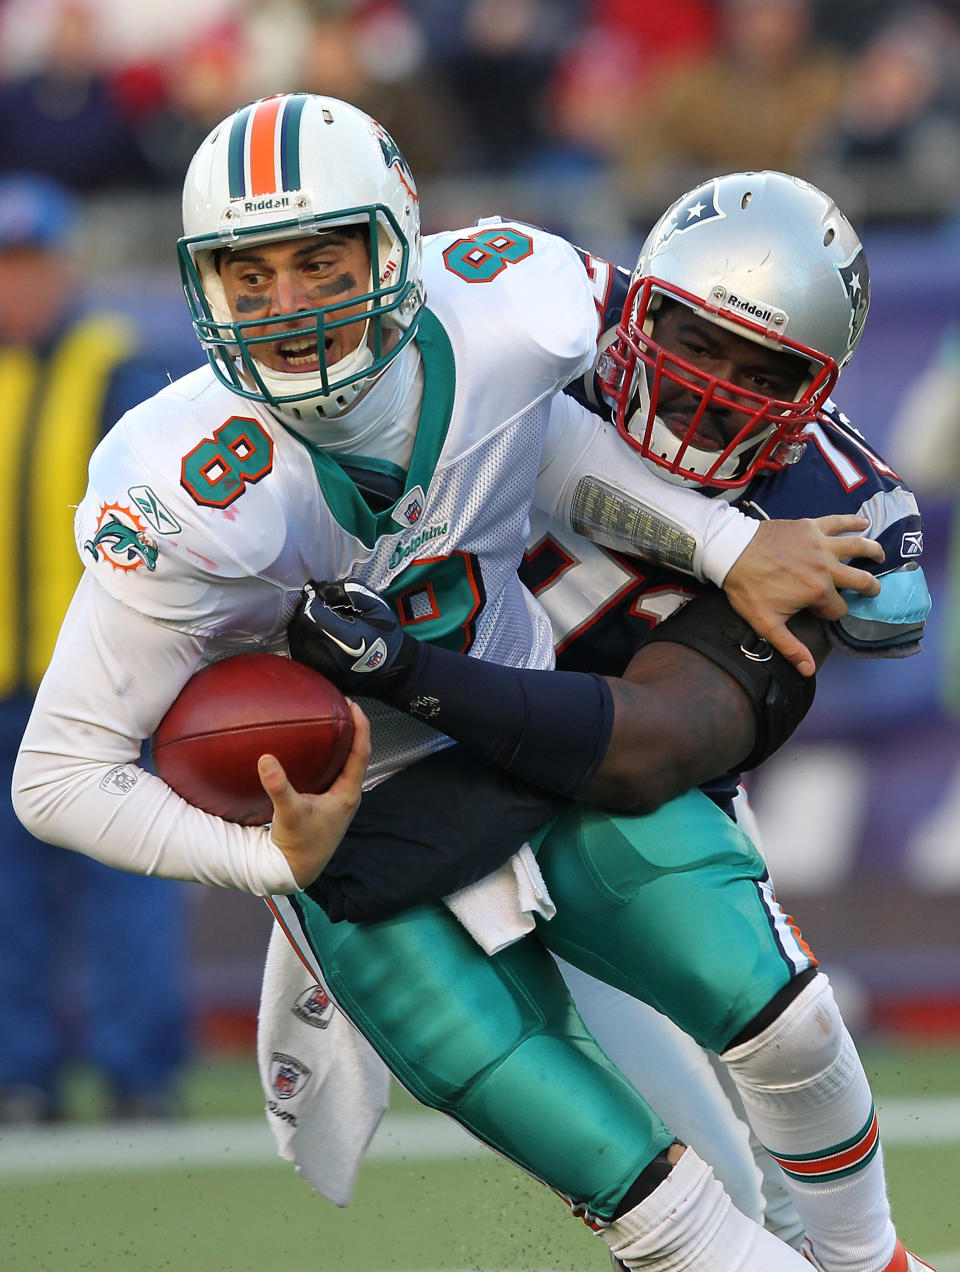 Matt Moore #8 of the Miami Dolphins is sacked by Brandon Deaderick #71 of the New England Patriots in the second half at Gillette Stadium on December 24, 2011 in Foxboro, Massachusetts. (Photo by Jim Rogash/Getty Images)